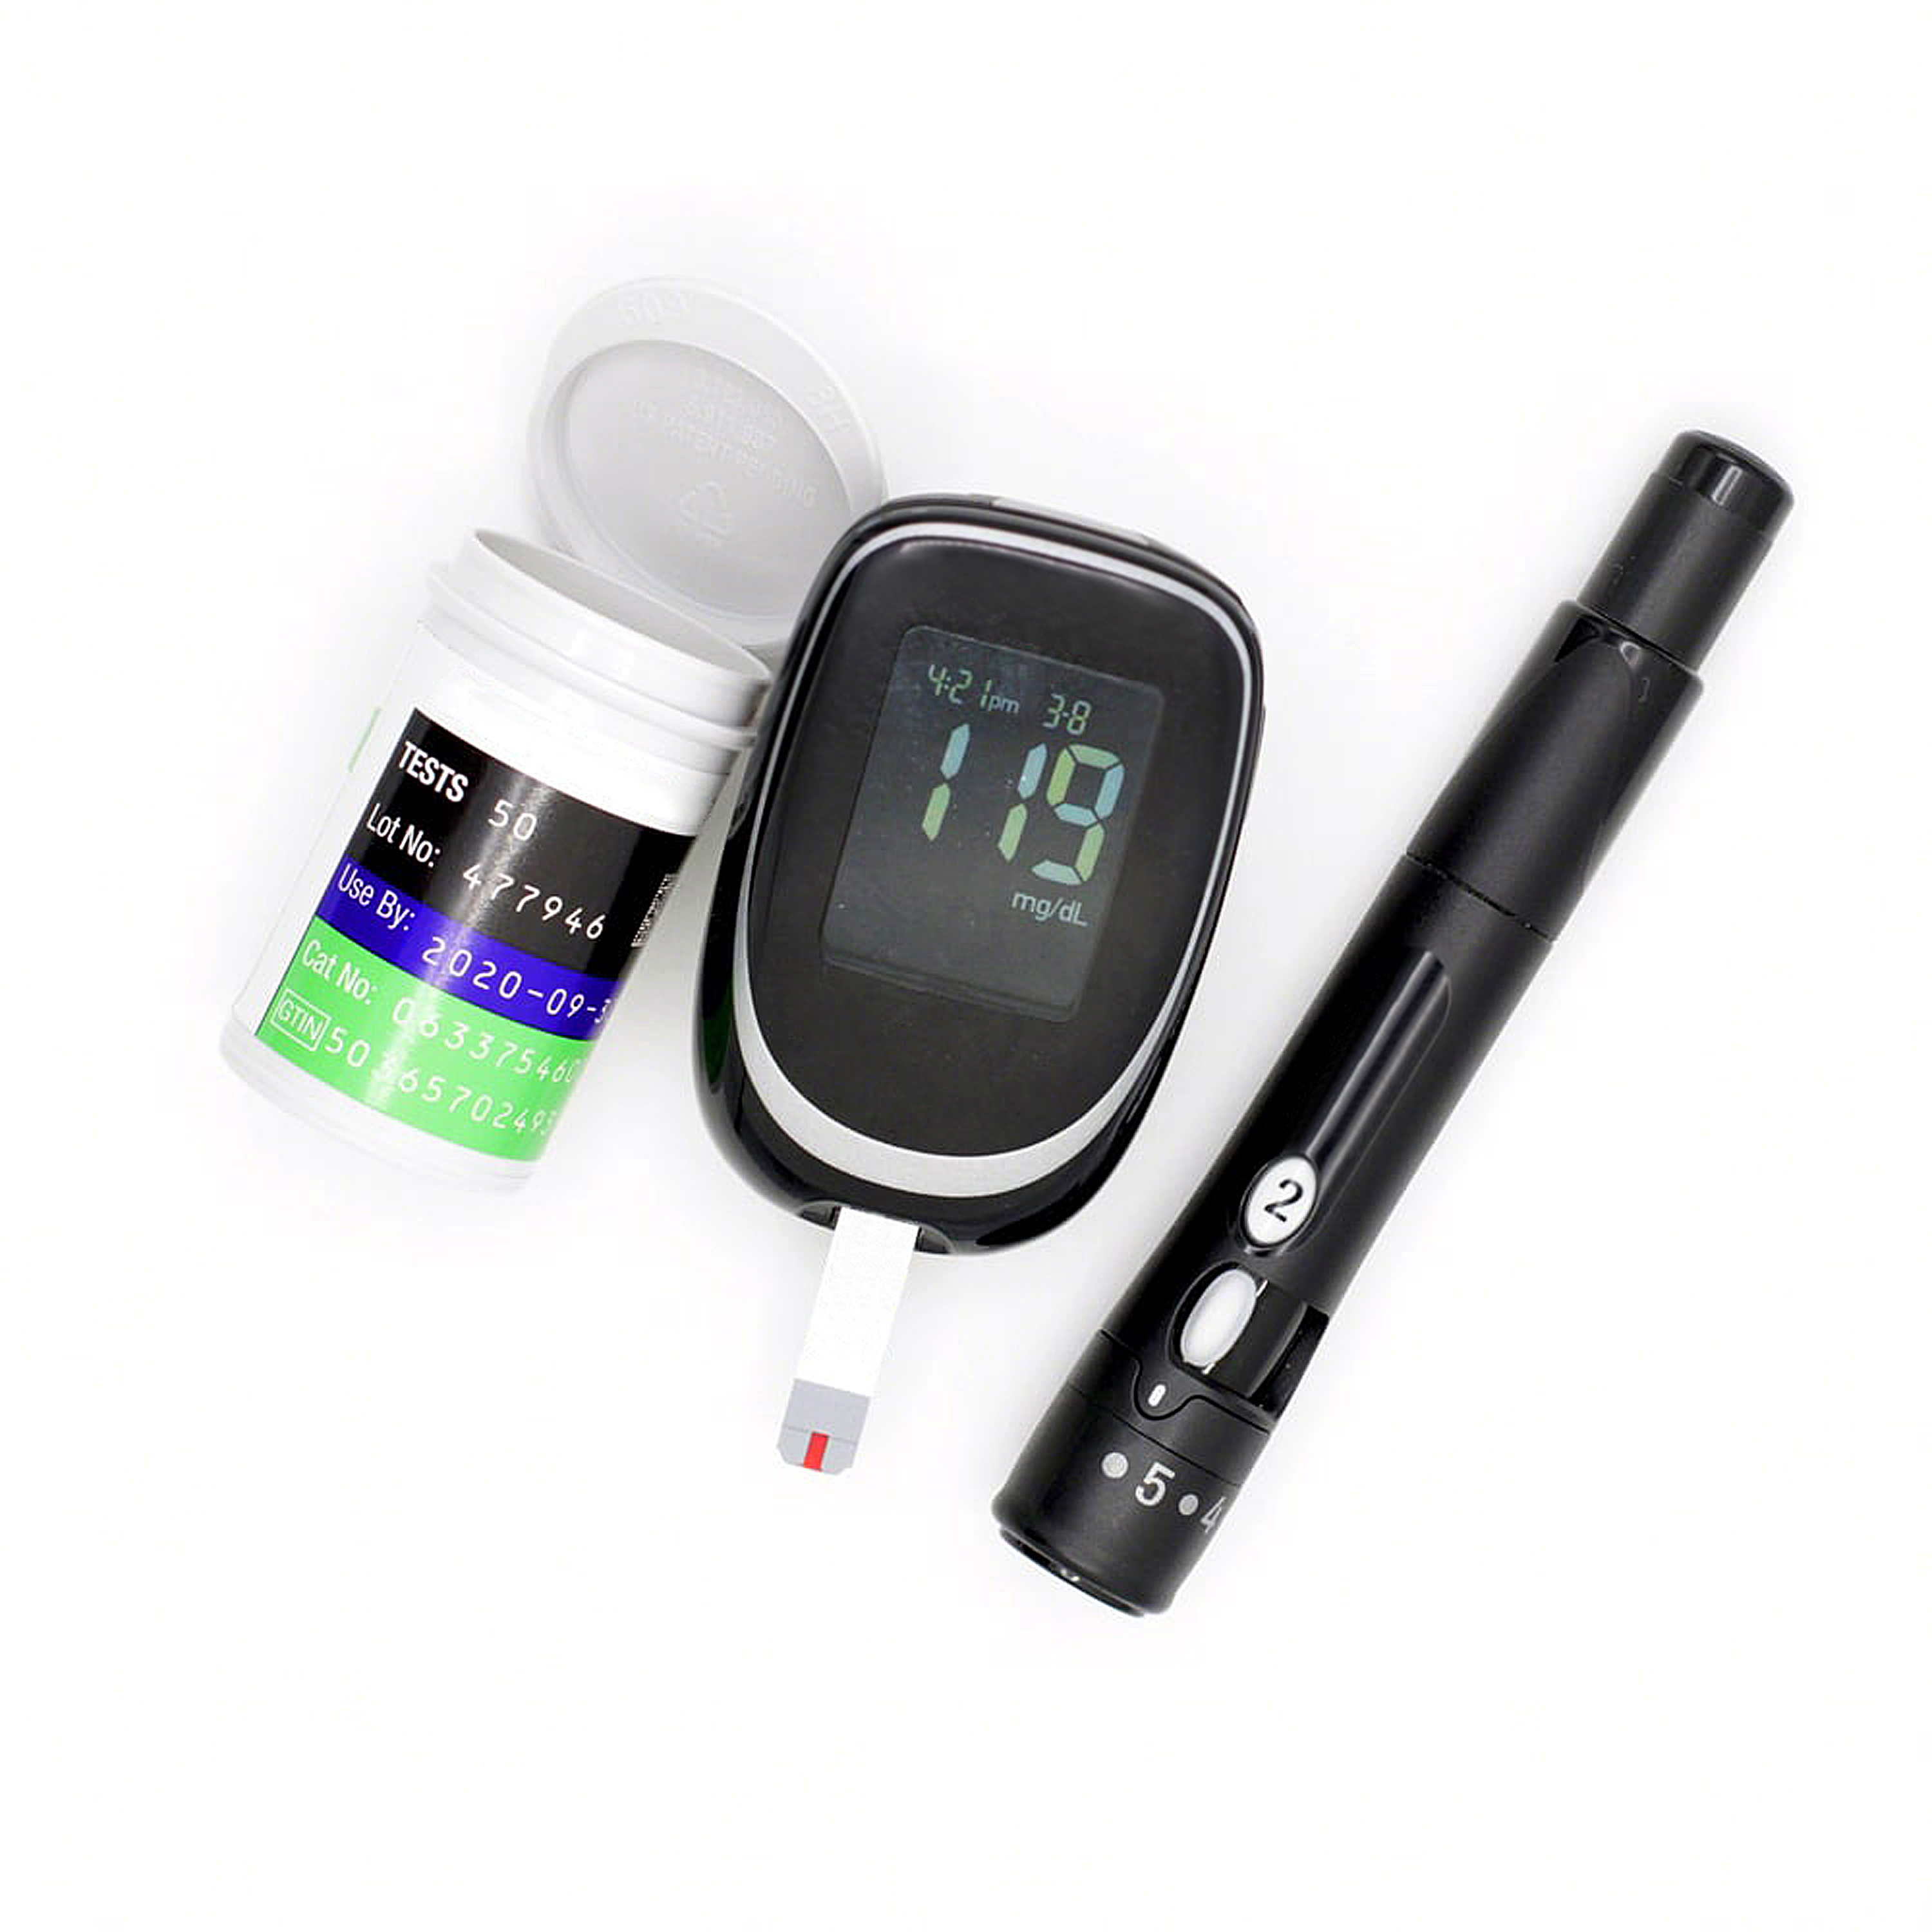 What is the normal blood glucose level?